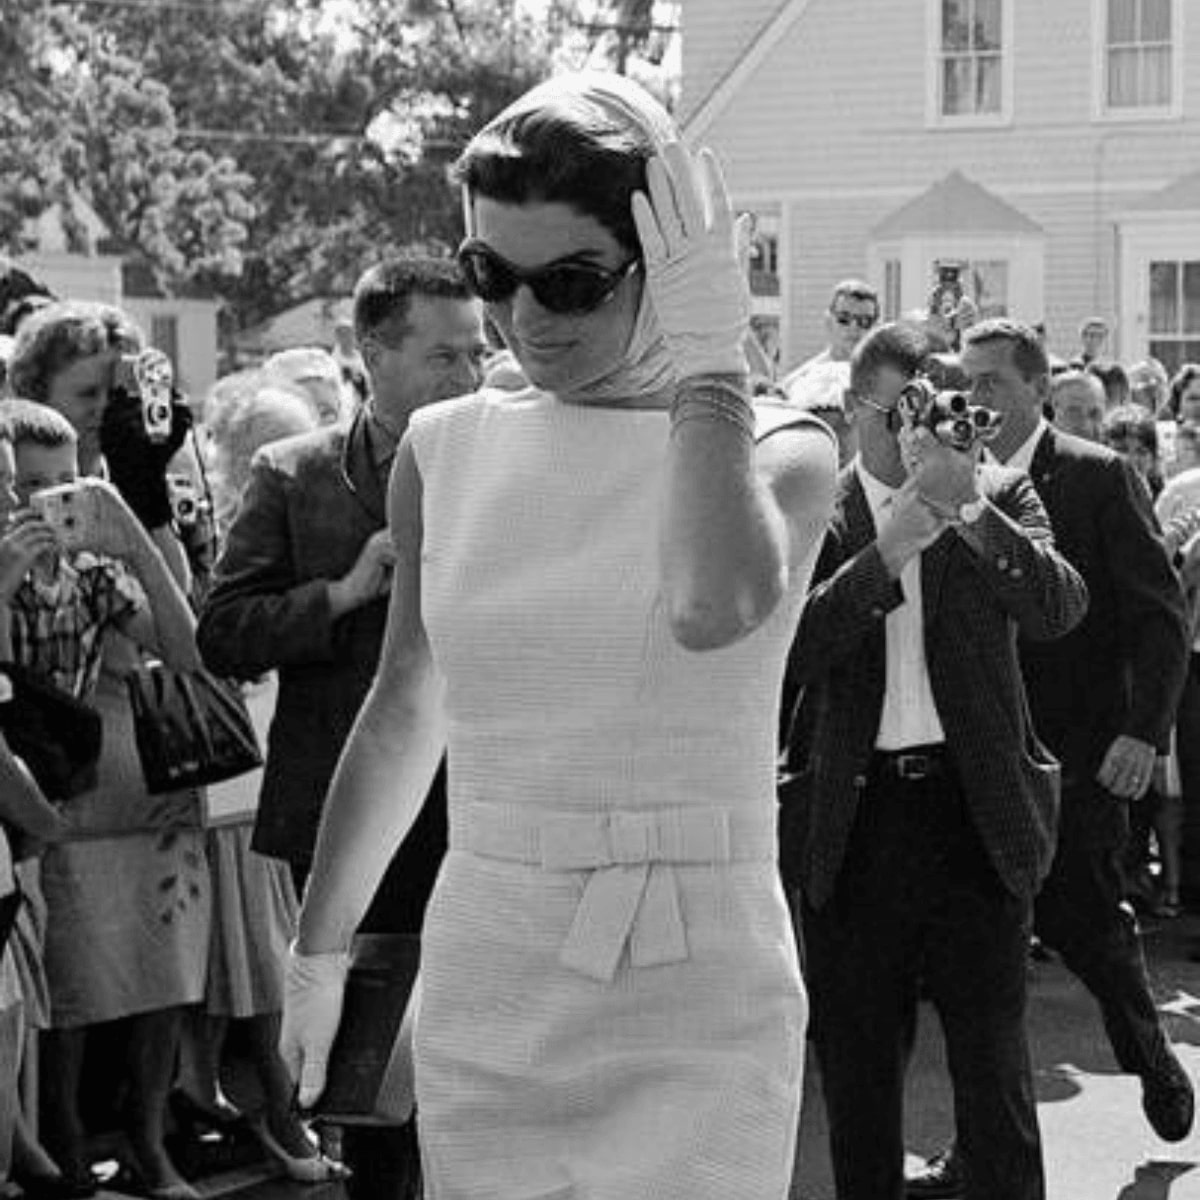 jackie o wearing a pair of sunglasses in a dress